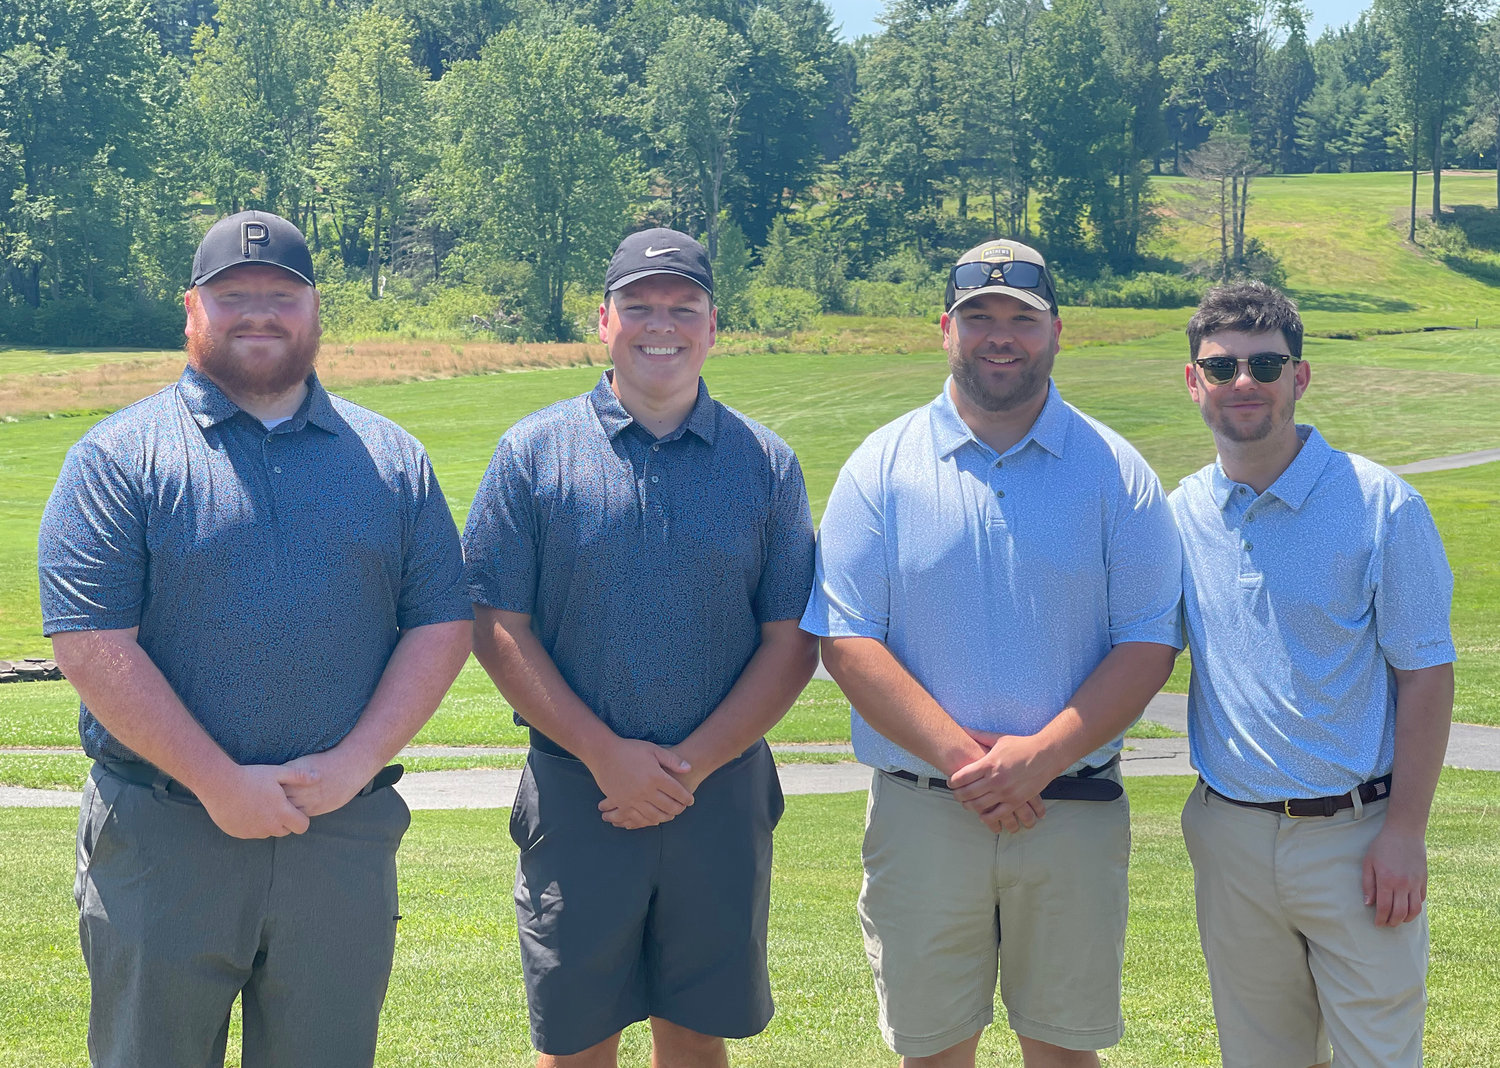 Winning the National Division in the 29th annual Rome Sports Hall of Fame Scramble Golf Tournament on Saturday at Rome Country Club with a score of 61 was Team Losowski consisting of, from left, Justin Losowski, Dylan Fournier, Thomas Harding and Matt Hughes.